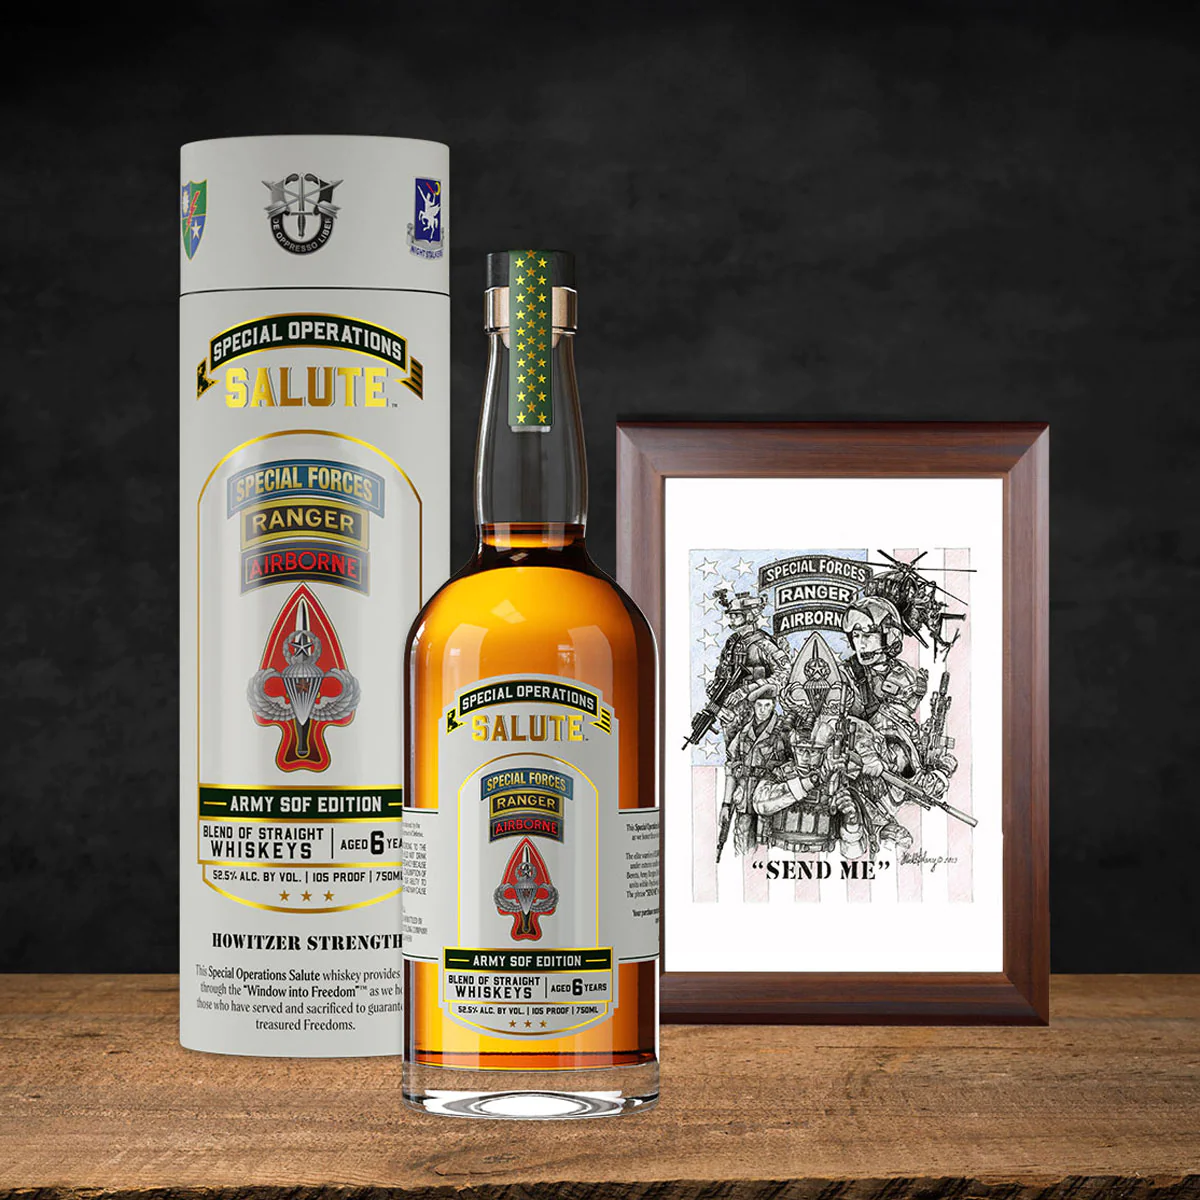 Heritage Distilling Unveils New “Special Operations Salute” Whiskey Series